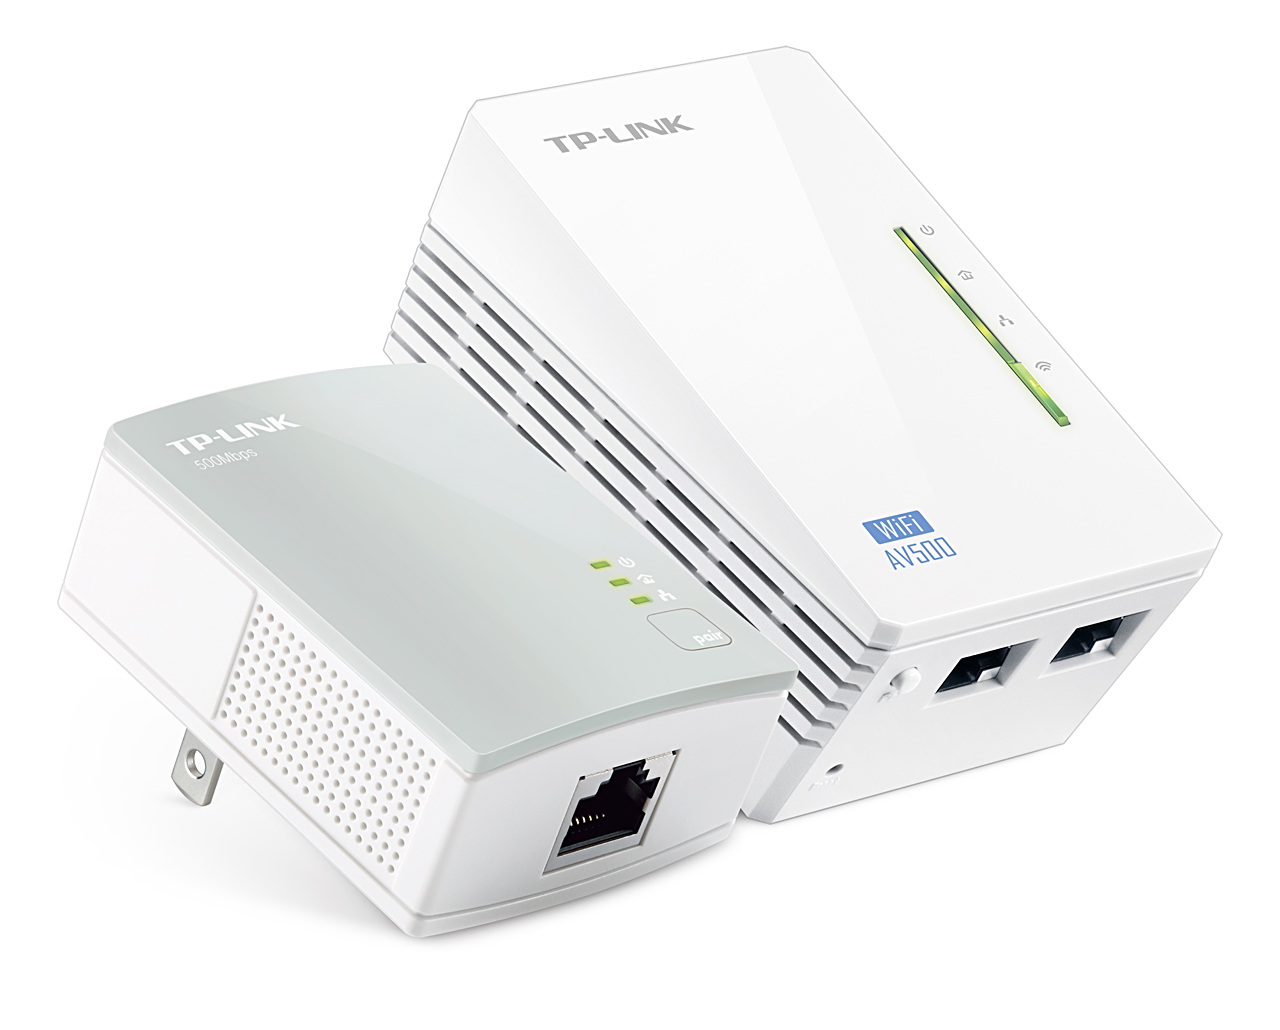 TP-Link Debuts its 300Mbps Wireless Range Extender Powerline Edition at CES 2014